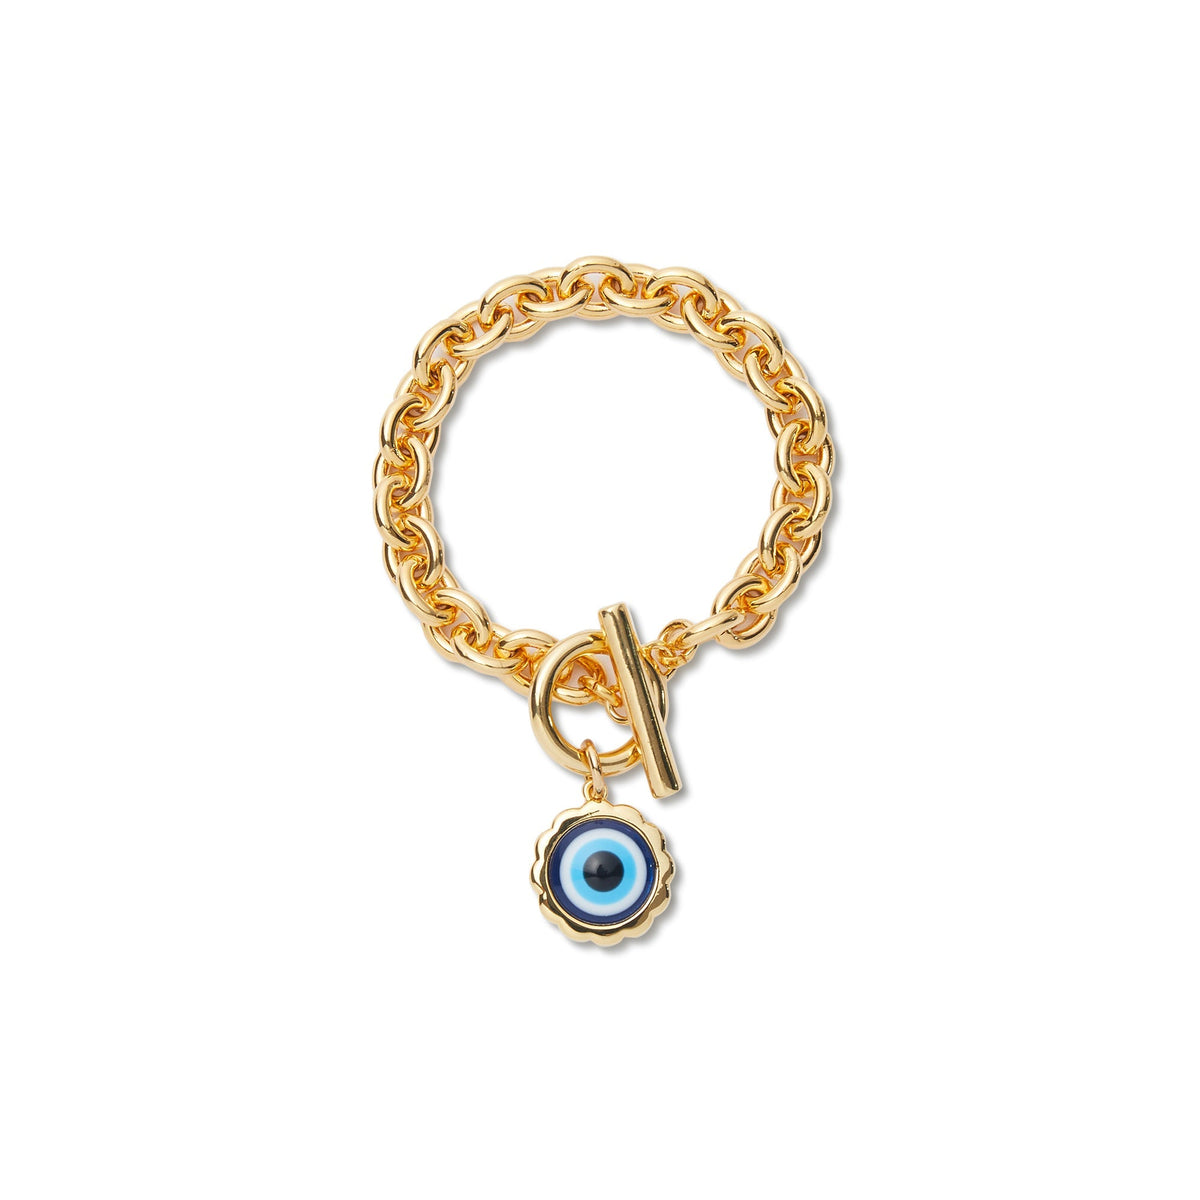 Amazon.com: 14k Gold Evil Eye Bracelet - Real Gold Rolo Chain with Blue Eyes  - Protection Jewelry, Nazar Charm, Gift for Her : Handmade Products